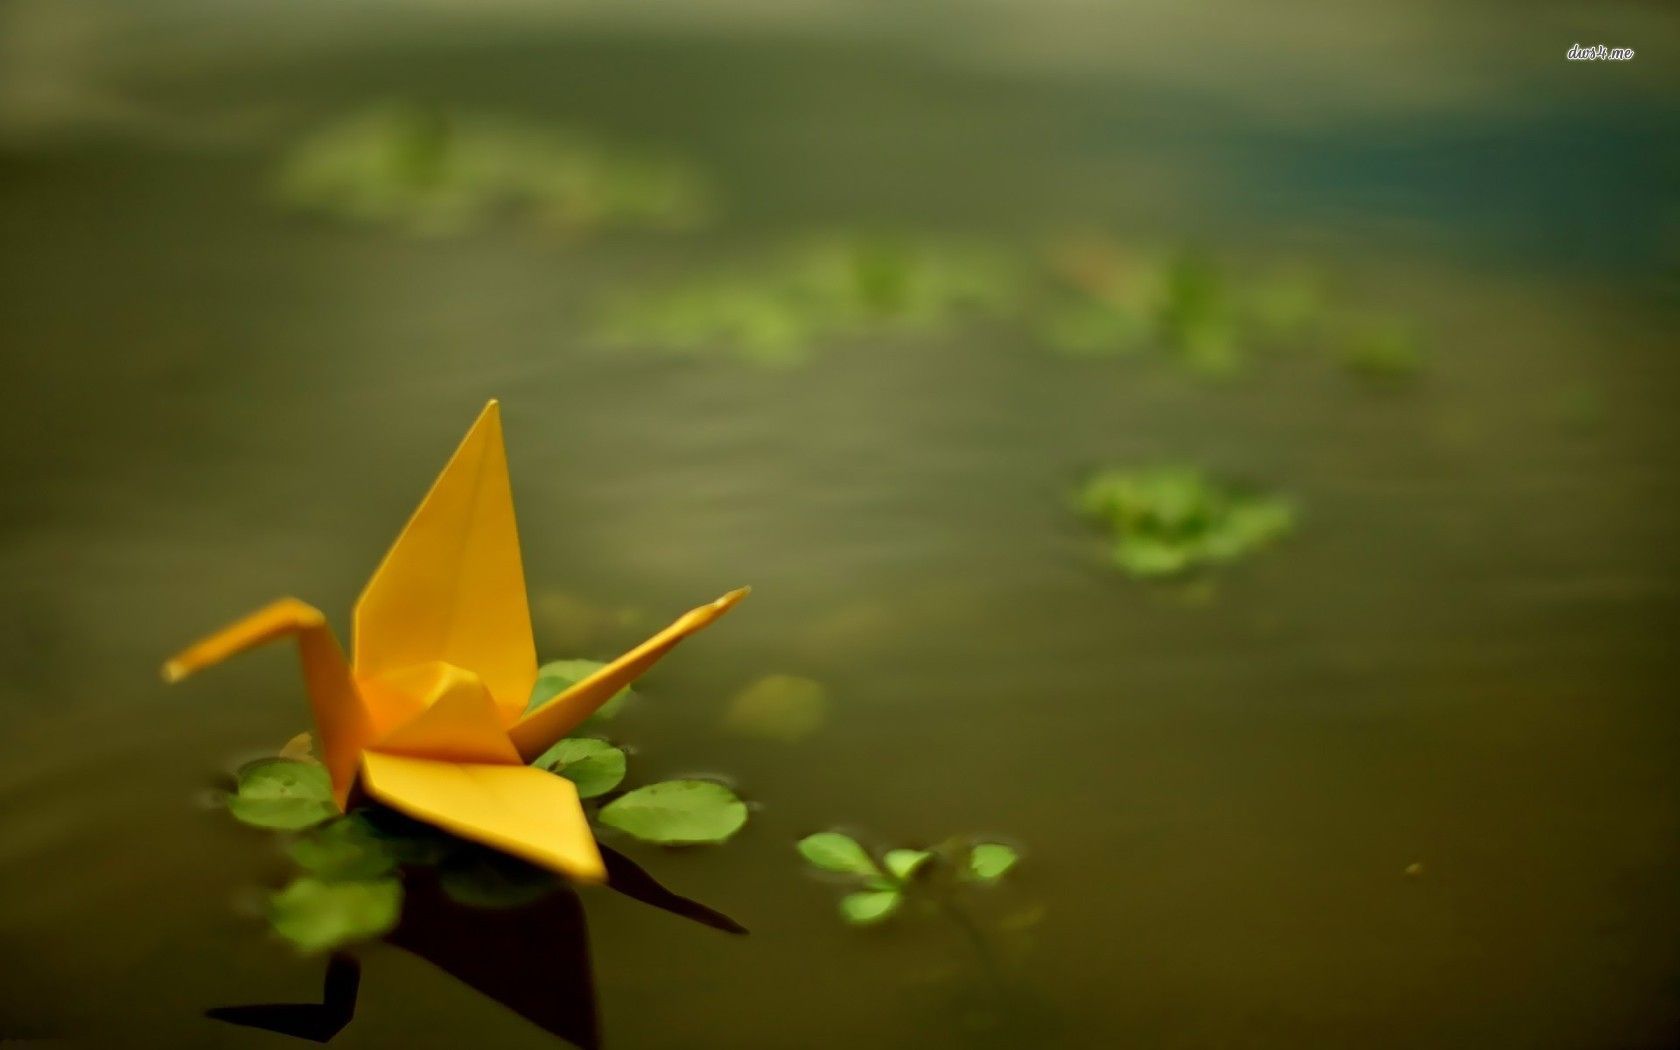 Origami crane floating on the pond wallpaper - Photography ...